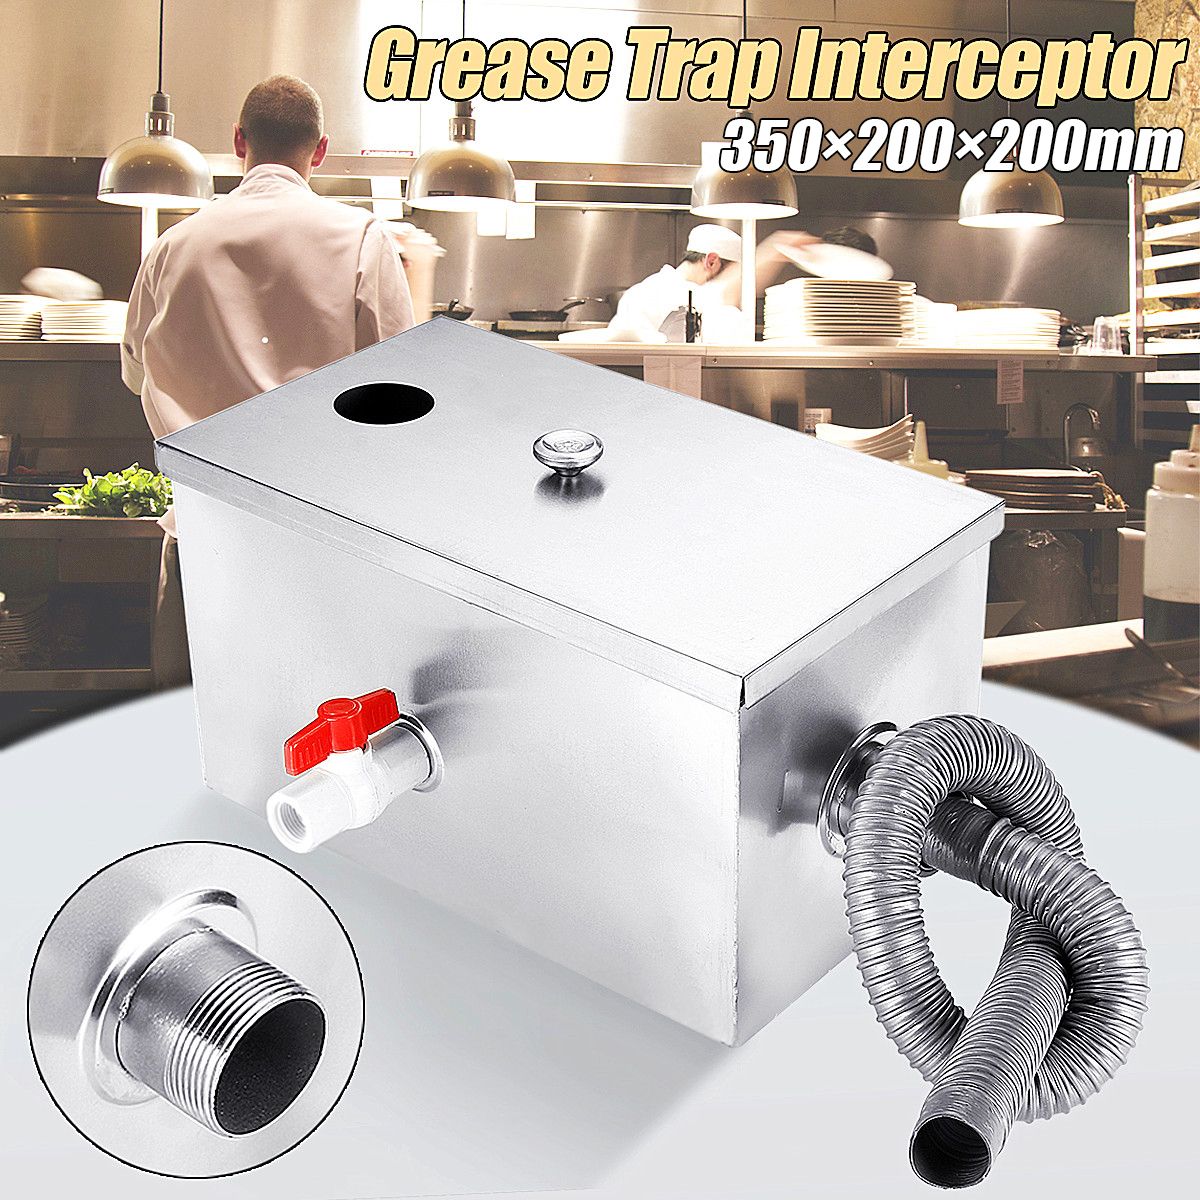 8LB-5GPM-Gallons-Per-Minute-Grease-Trap-Stainless-Steel-Interceptor-Thickened-1352575